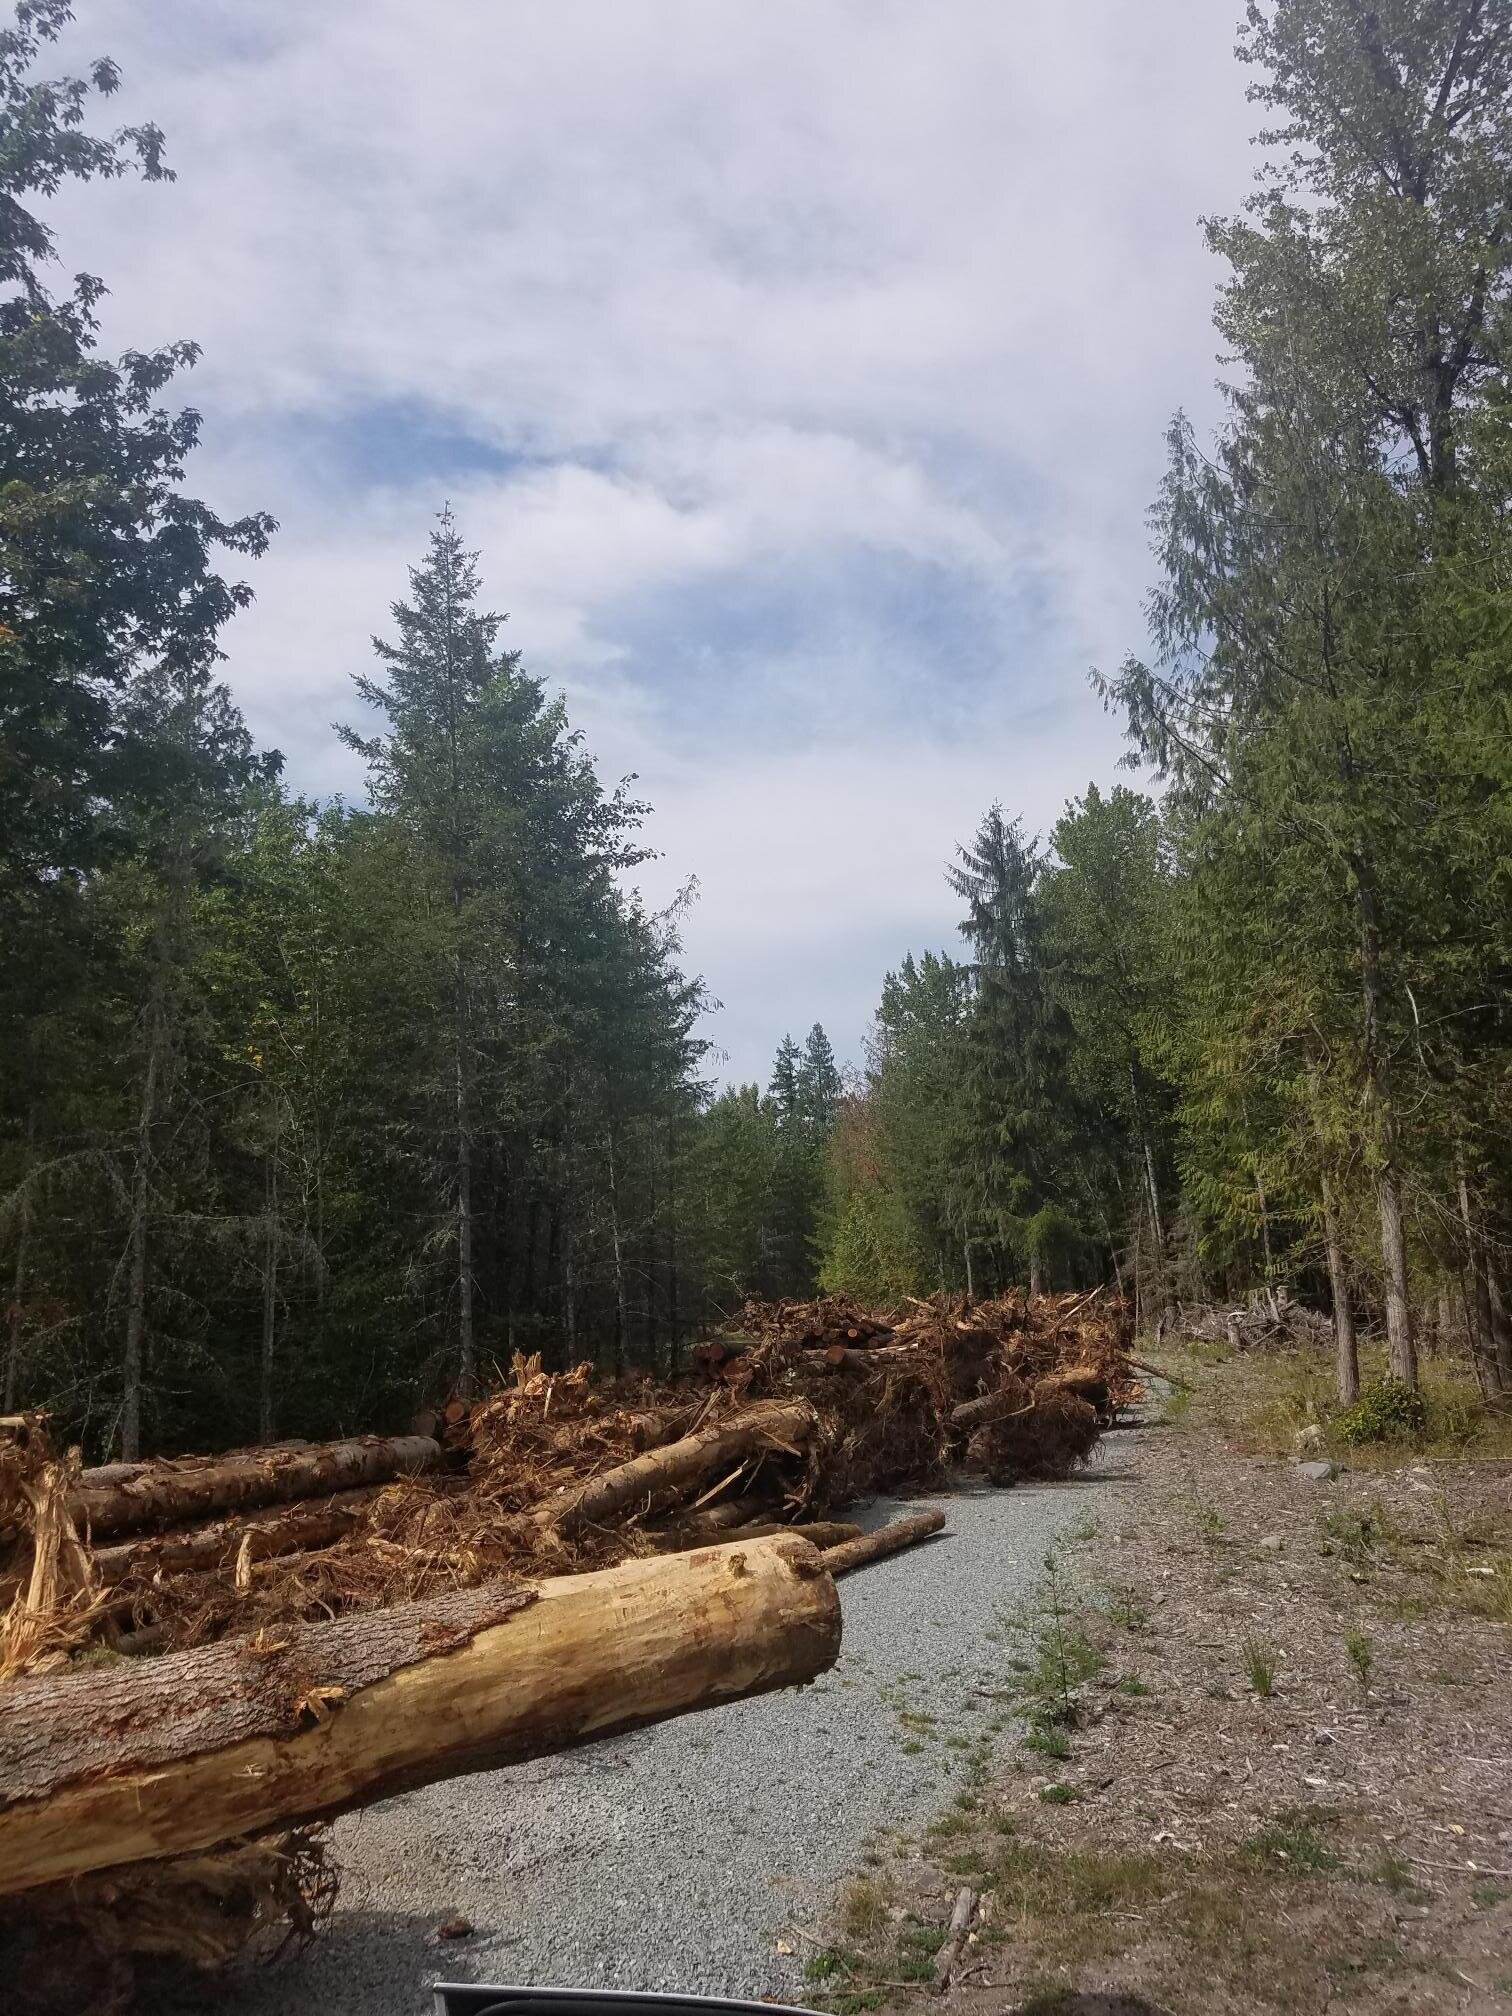 08.20.19 Access Point #2 Road to the Left,  Blocked with Logs.jpg